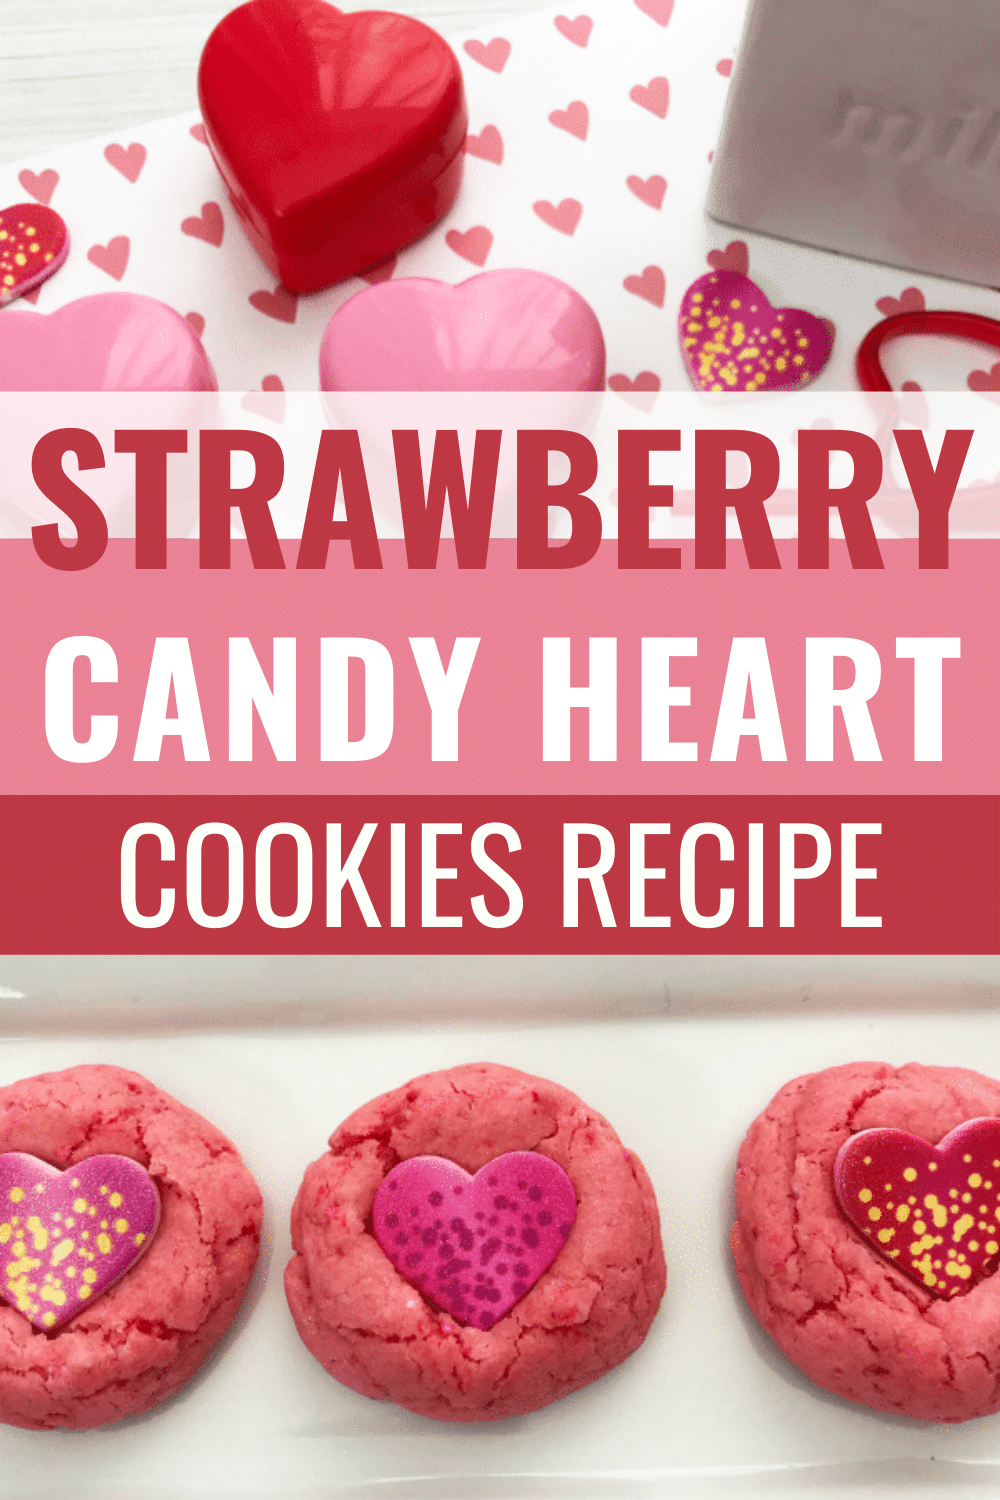 Strawberry Cake Mix Cookies are the perfect treat for Valentine's Day. They are perfect to share with friends and family. #cookies #ValentinesDay #strawberry #strawberrycakemixcookies #cakemixcookies via @wondermomwannab